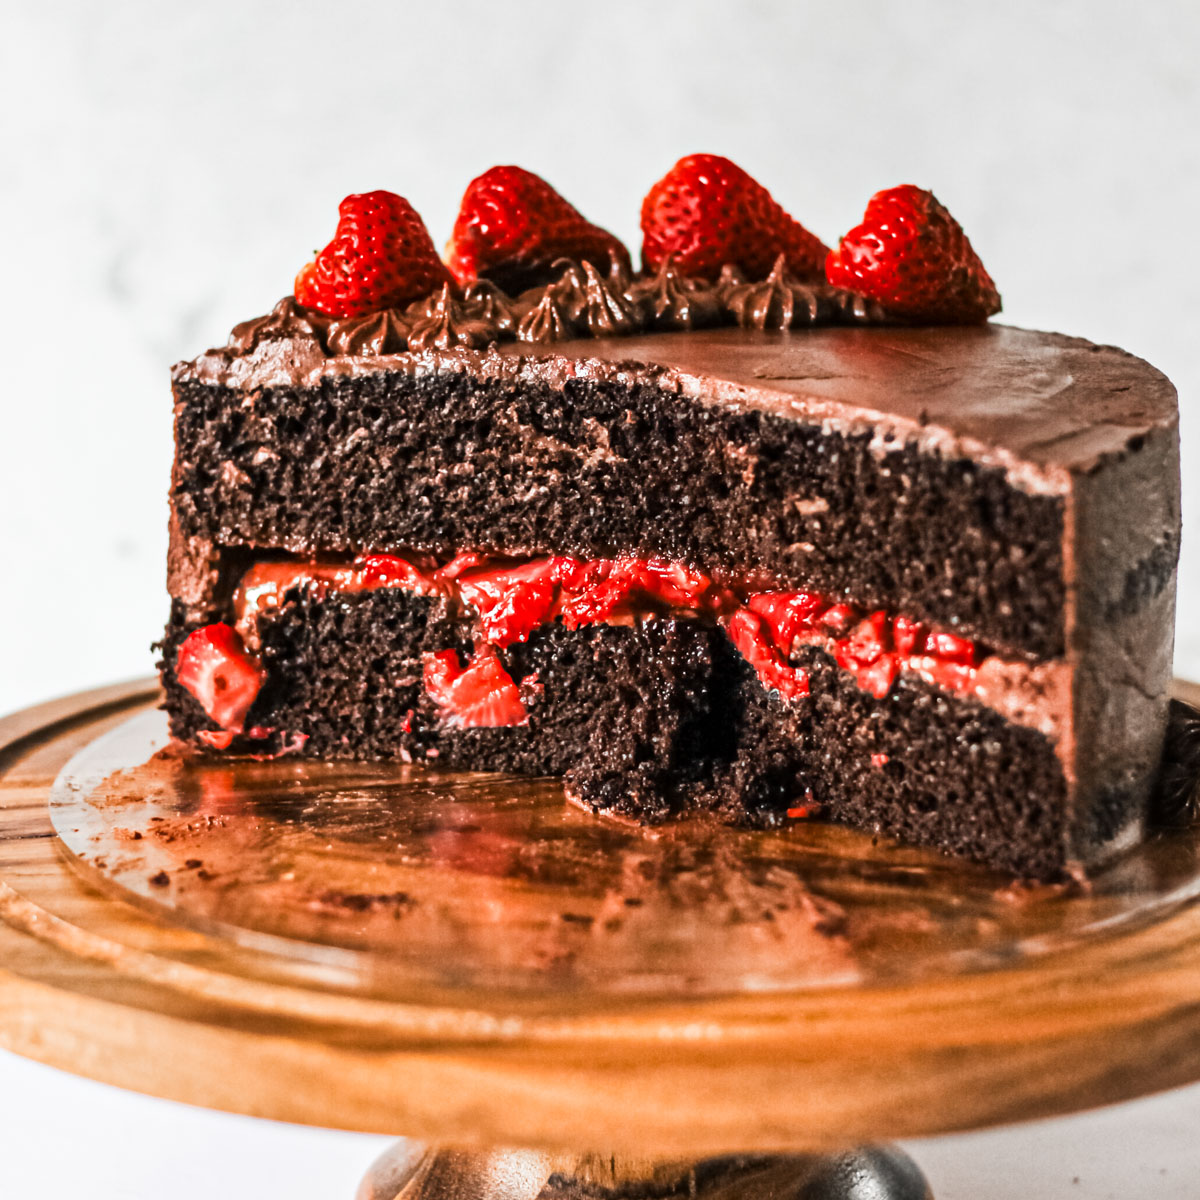 Inside look at chocolate layer cake with strawberry filling.